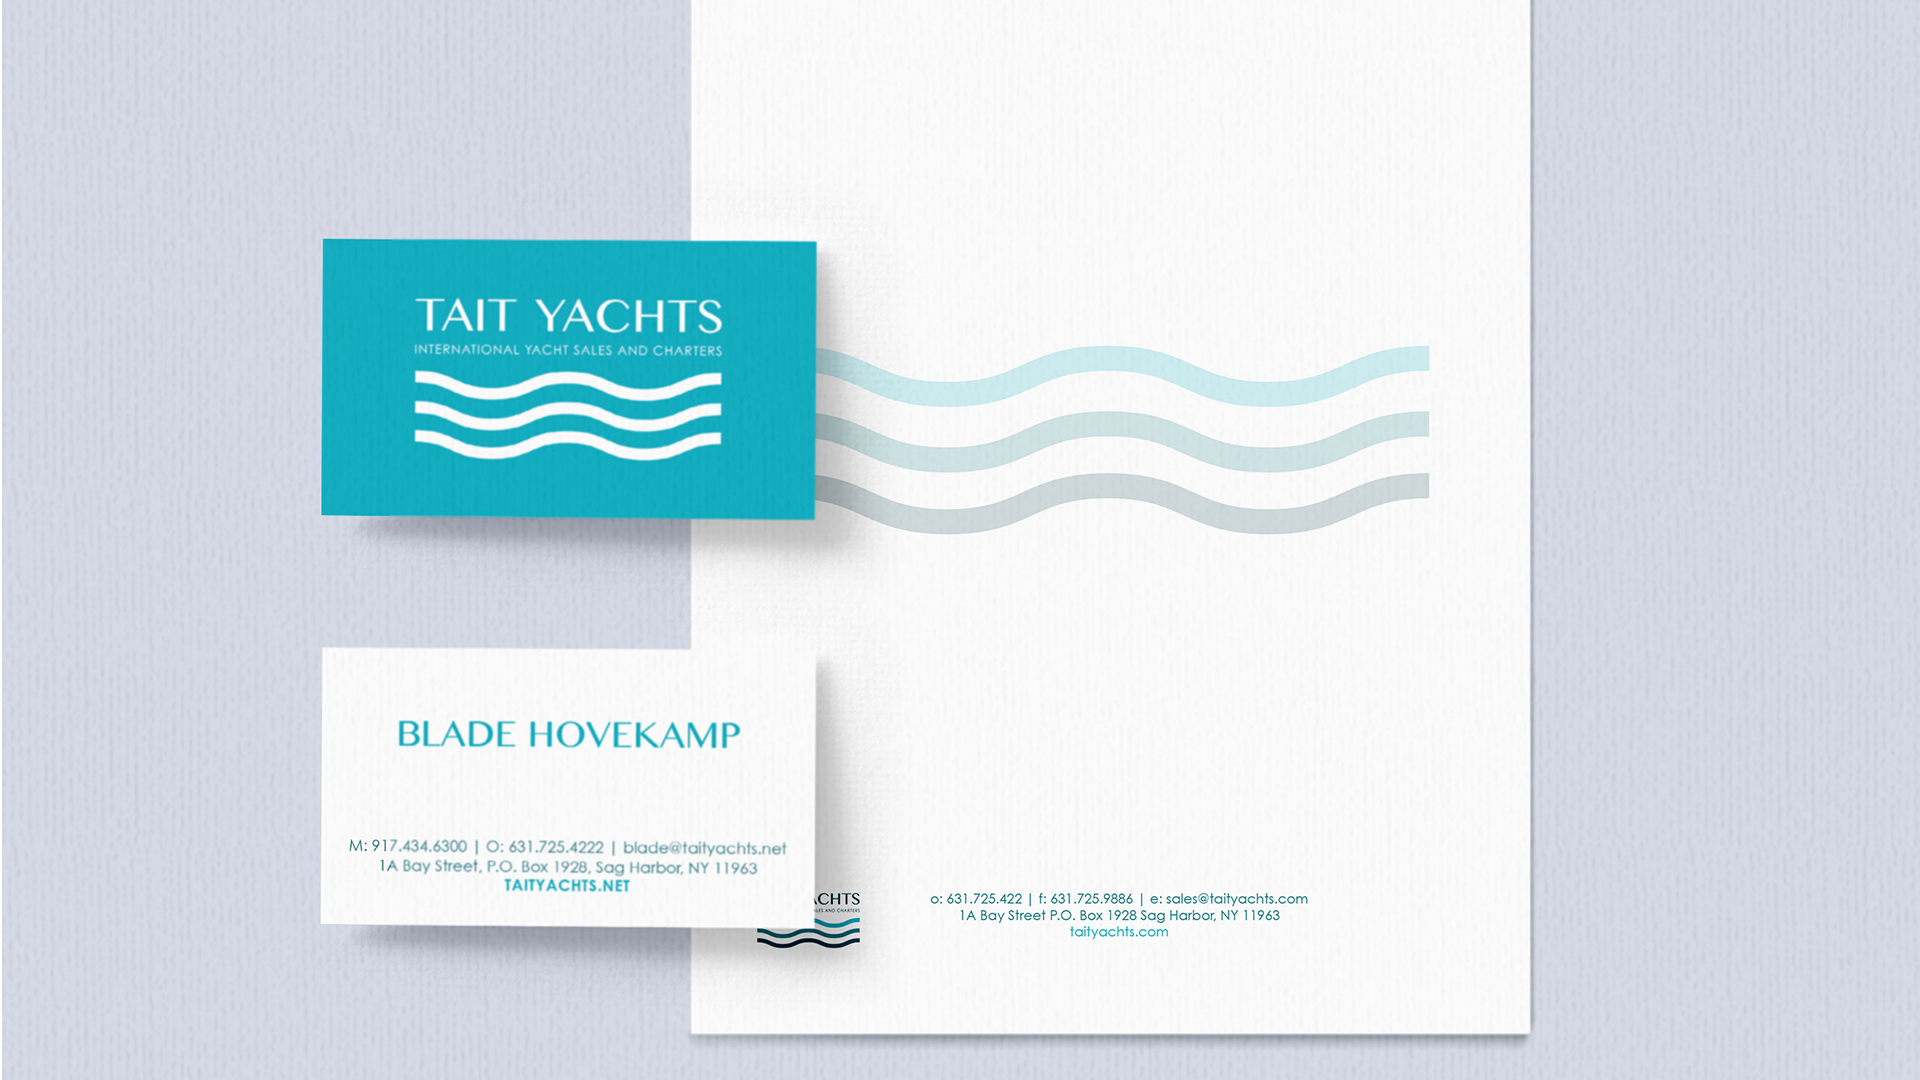 Custom Business Cards & Stationary Design - Tait Yachts International Yacht Sales and Charters